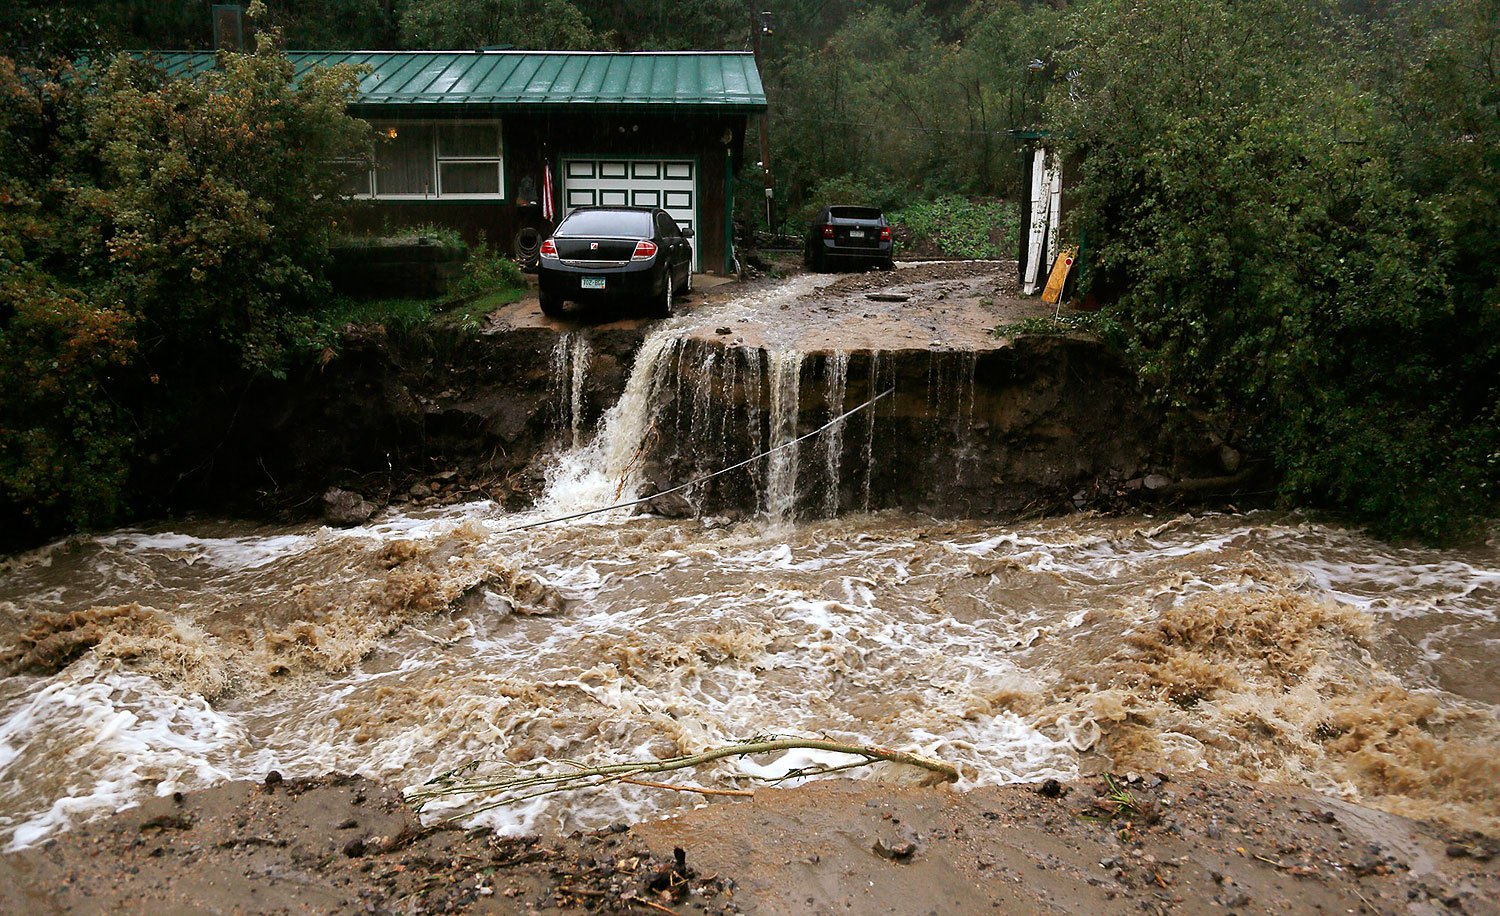 A home and car are stranded after a flash flood in Coal Creek destroyed the bridge near Golden, Colorado Sept. 12, 2013. Flooding in Colorado left eight people dead, prompted hundreds to be evacuated, caused building collapses and stranded cars, officials said.